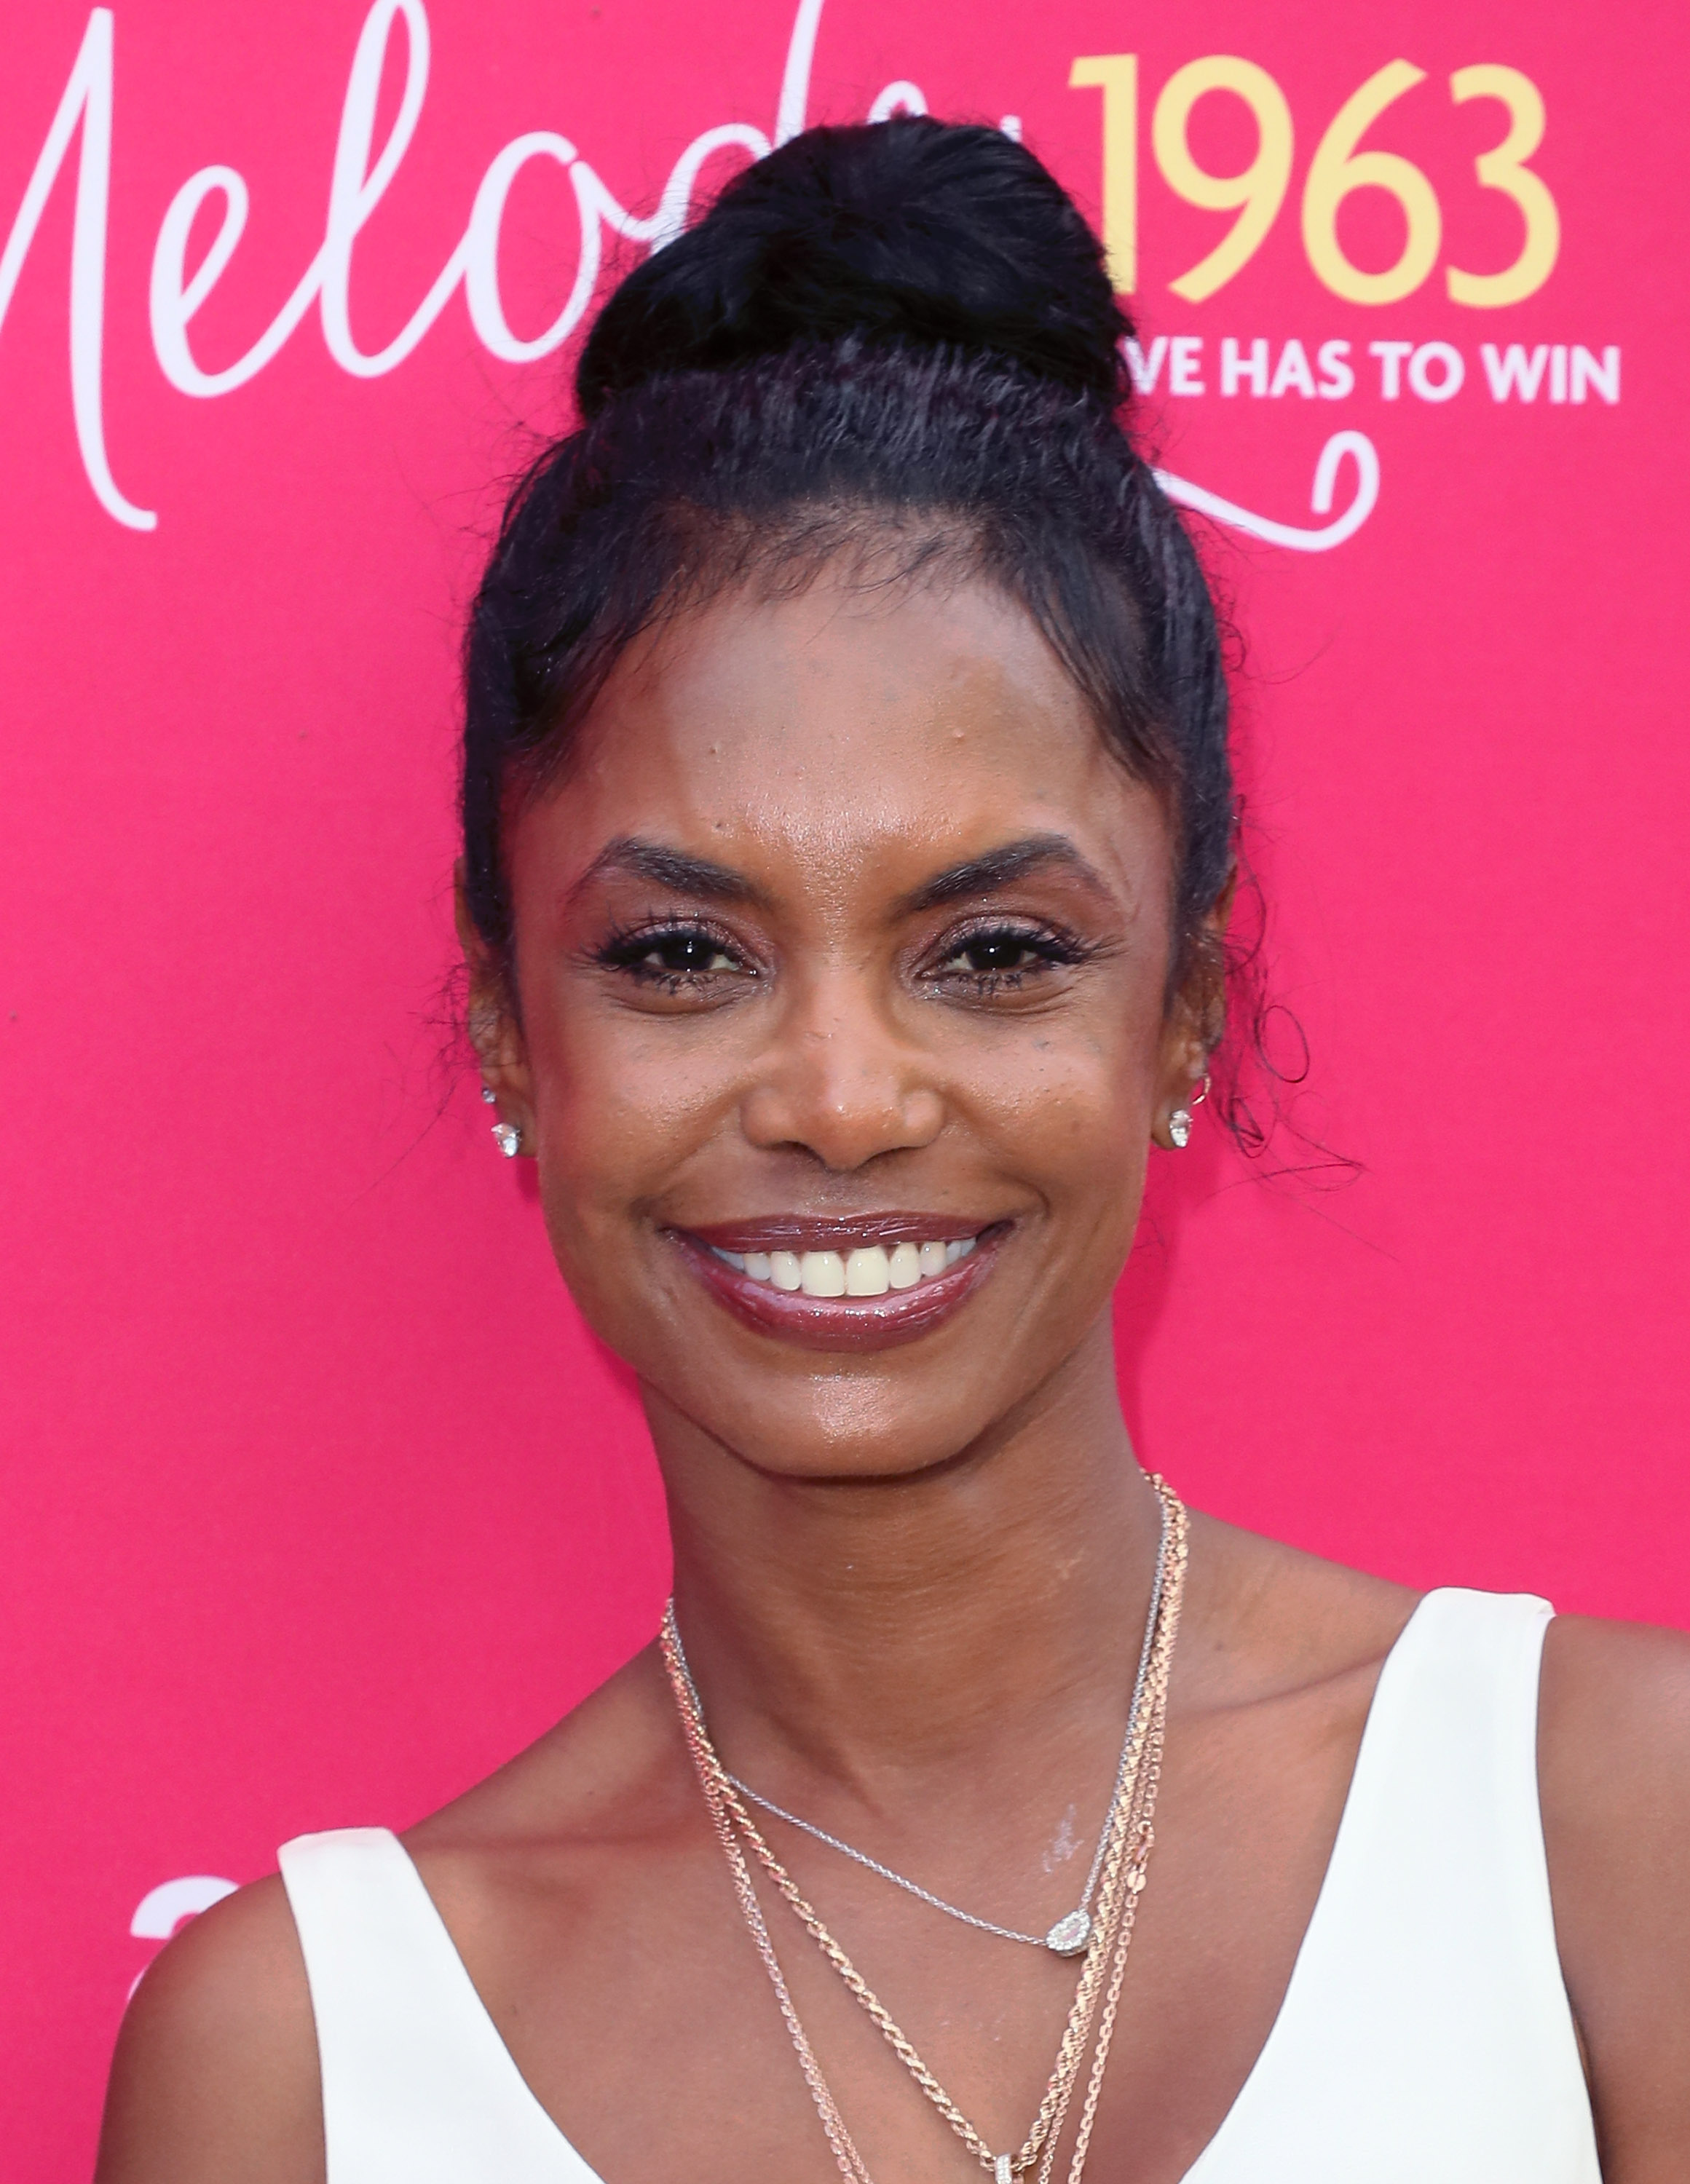 Kim Porter at the premiere of "An American Girl Story - Melody 1963: Love Has to Win,"  2016 | Source: Getty Images